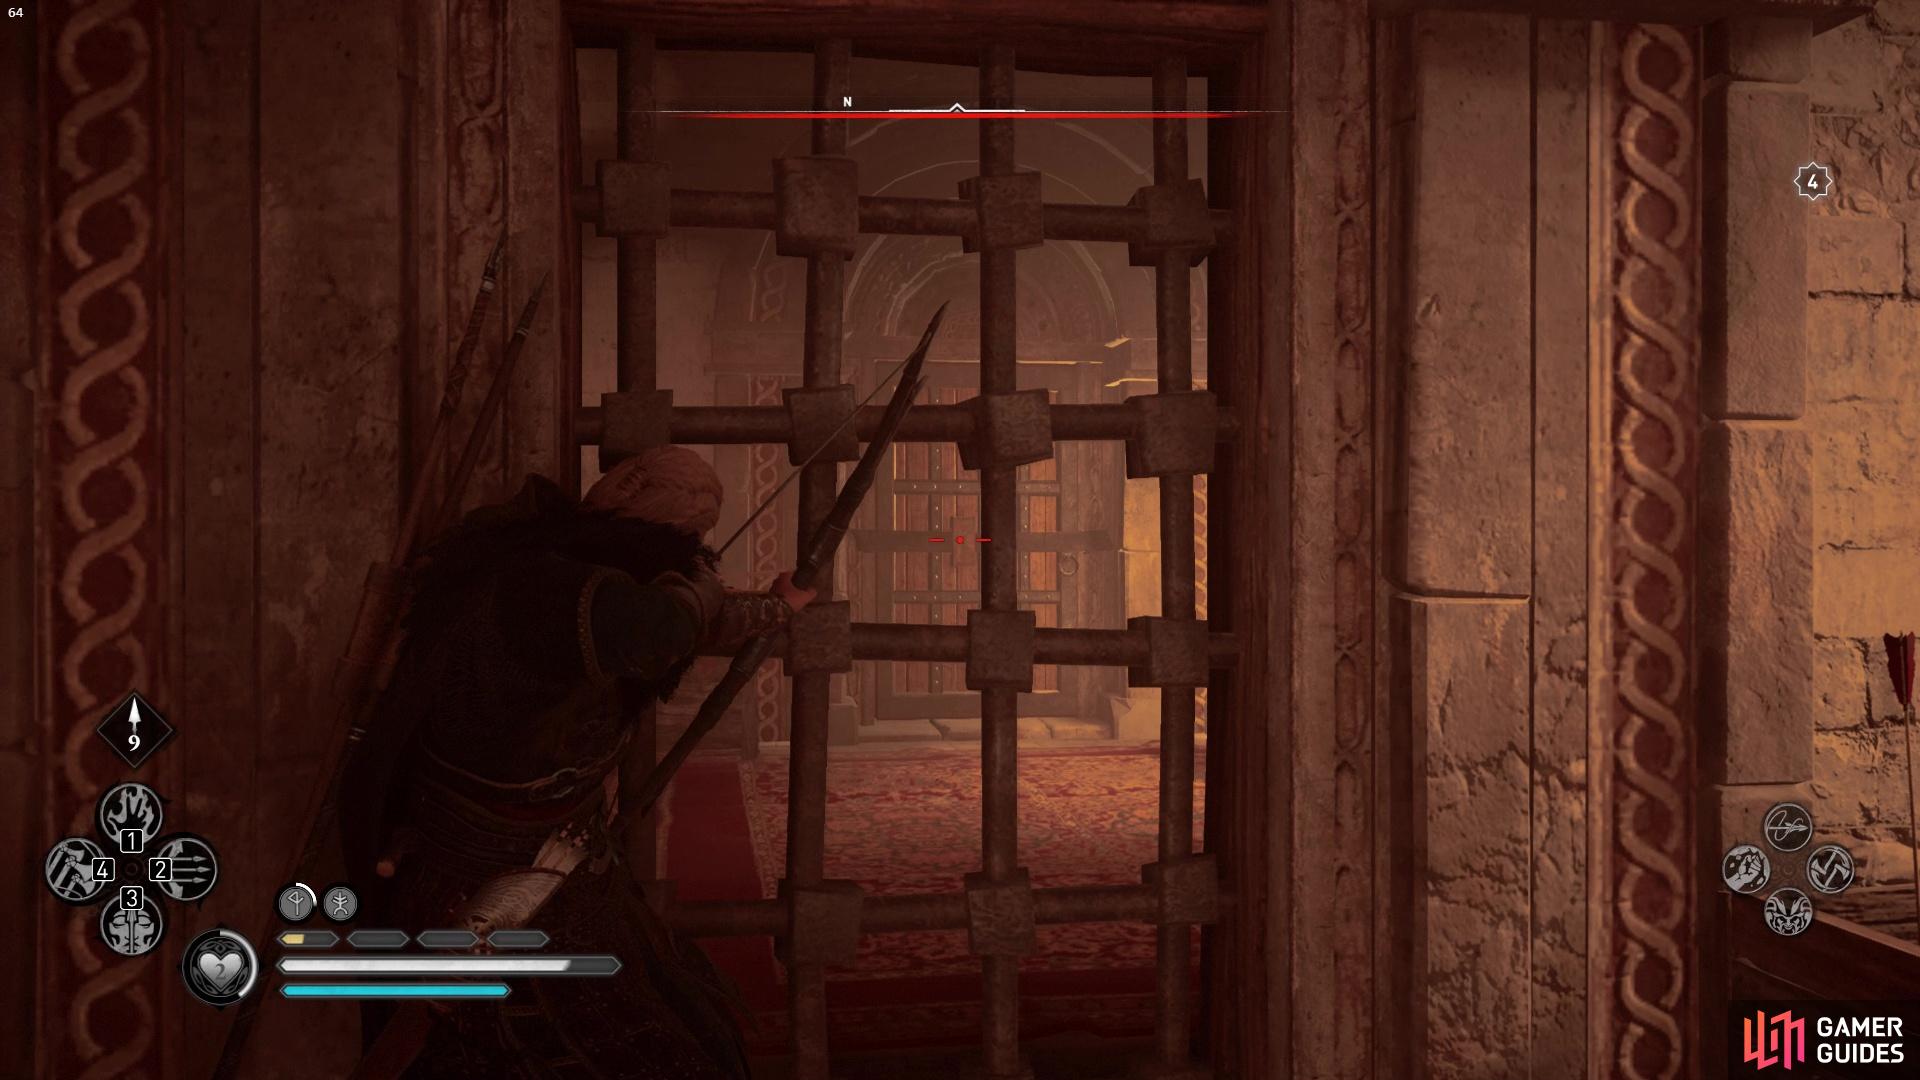 Youll first need to enter the main abbey and shoot the door lock through the bars.